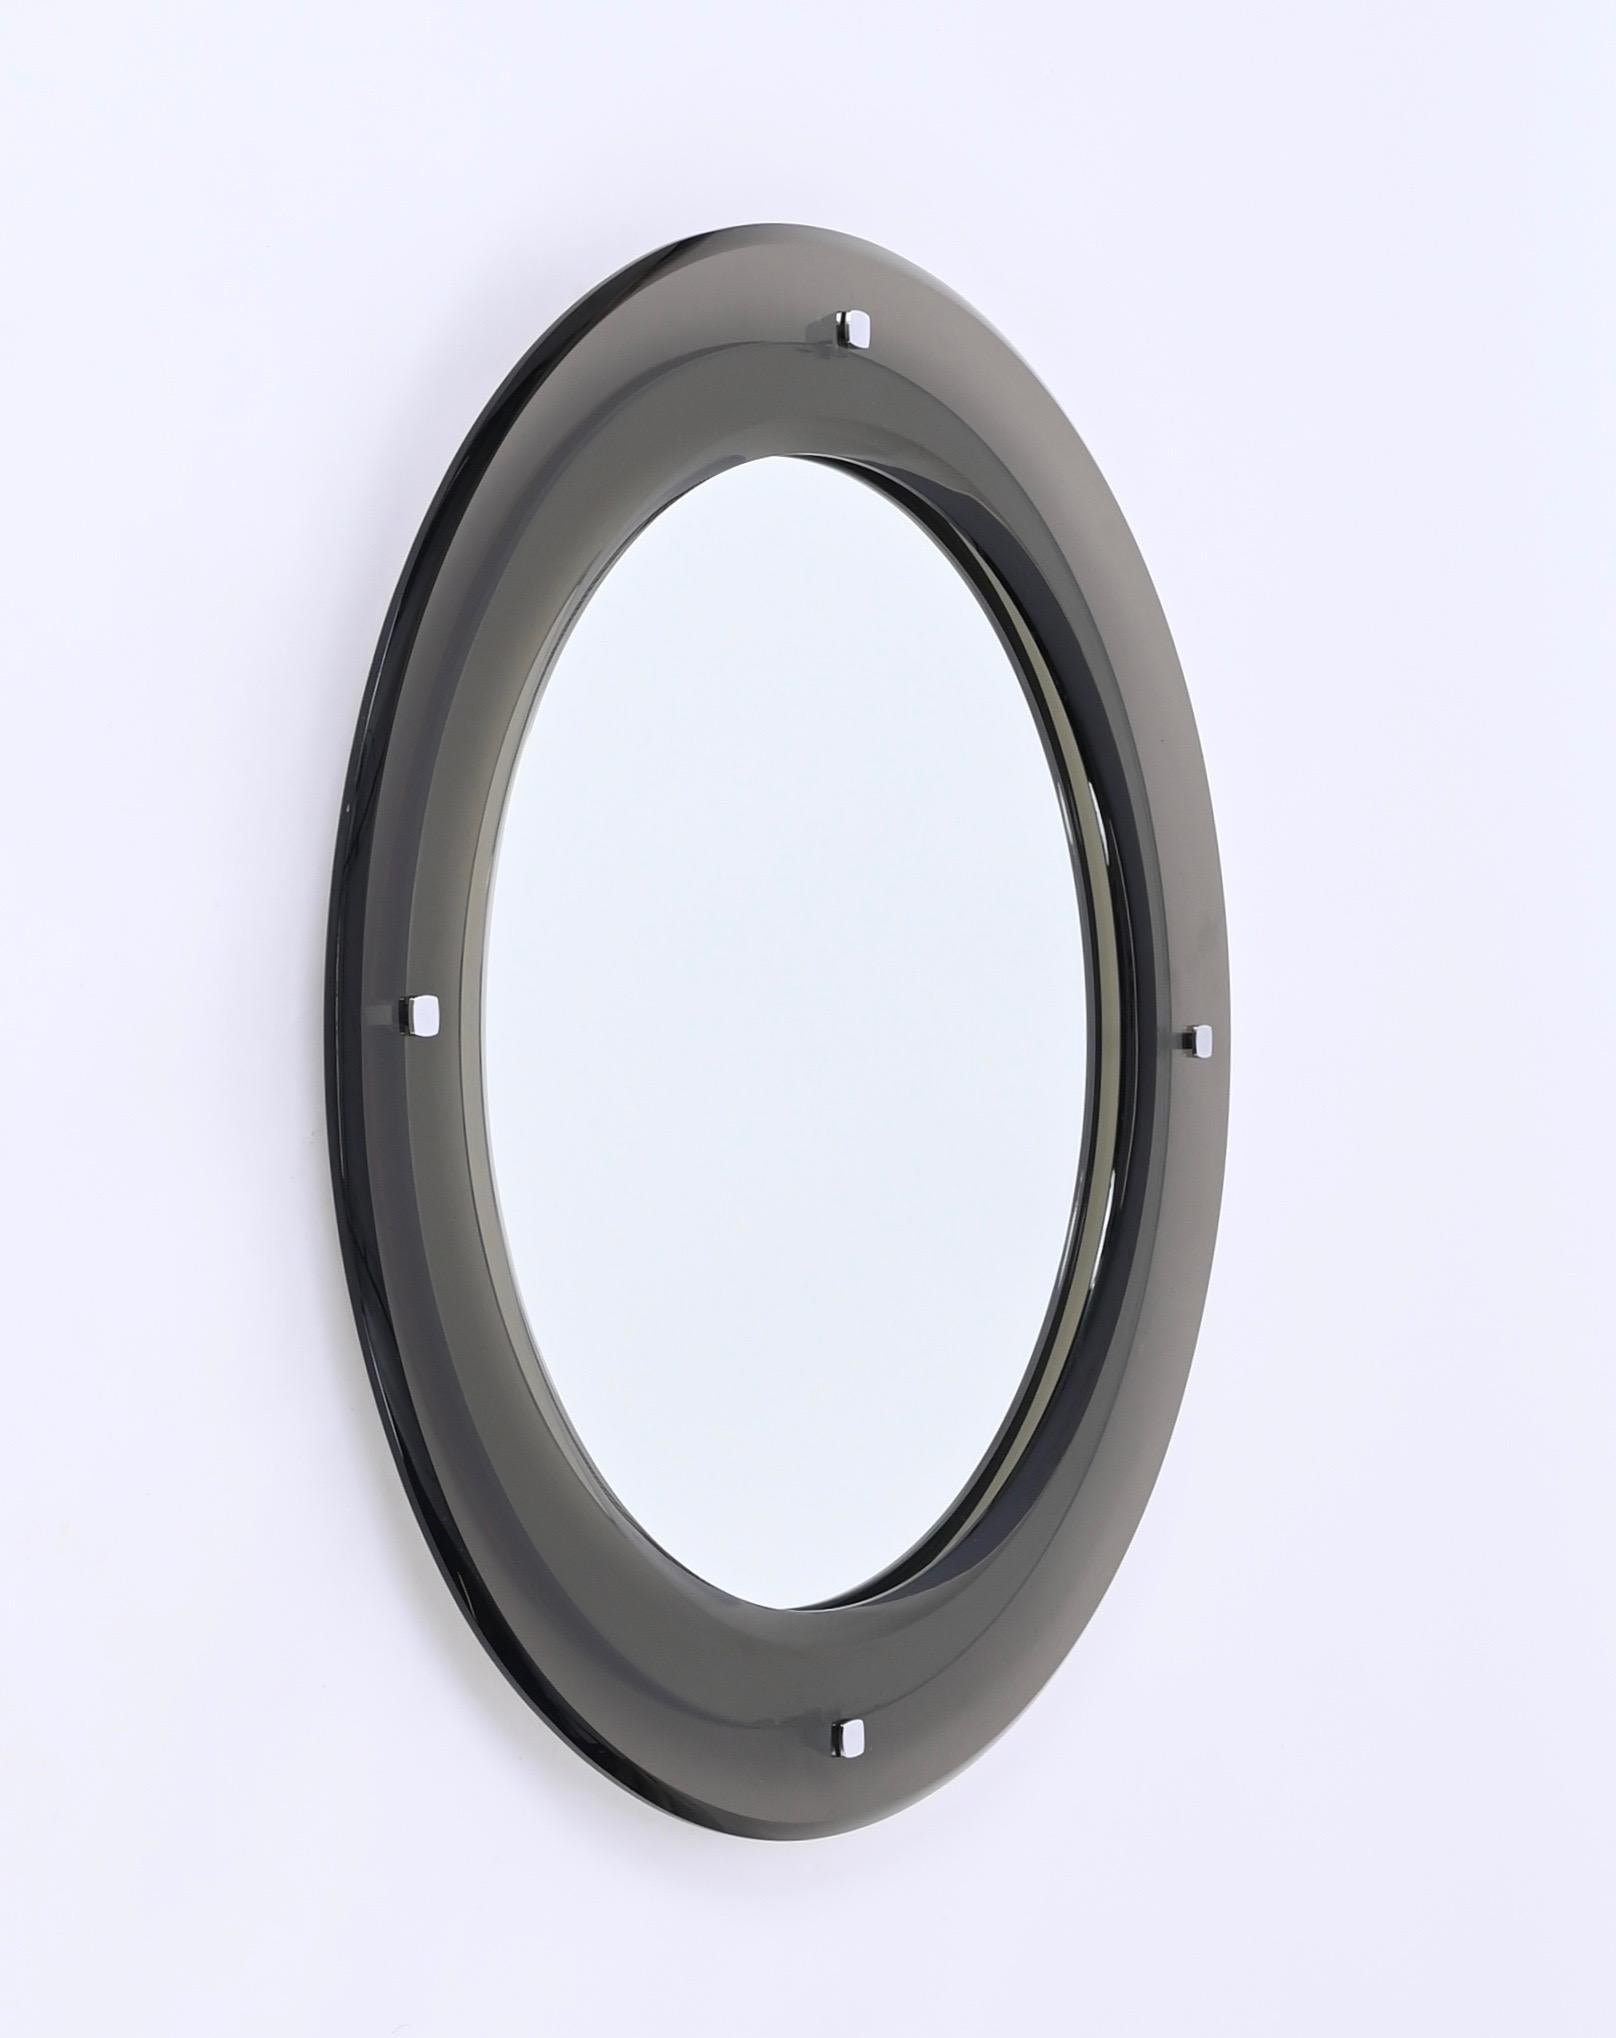 Gorgeous round mirror with double bevelled frame in smoked glass produced by Sena Cristal in Italy in Italy in the 1970s.

This fantastic space age mirror features a stunning frame with two large bevels in smoked glass that changes color depending